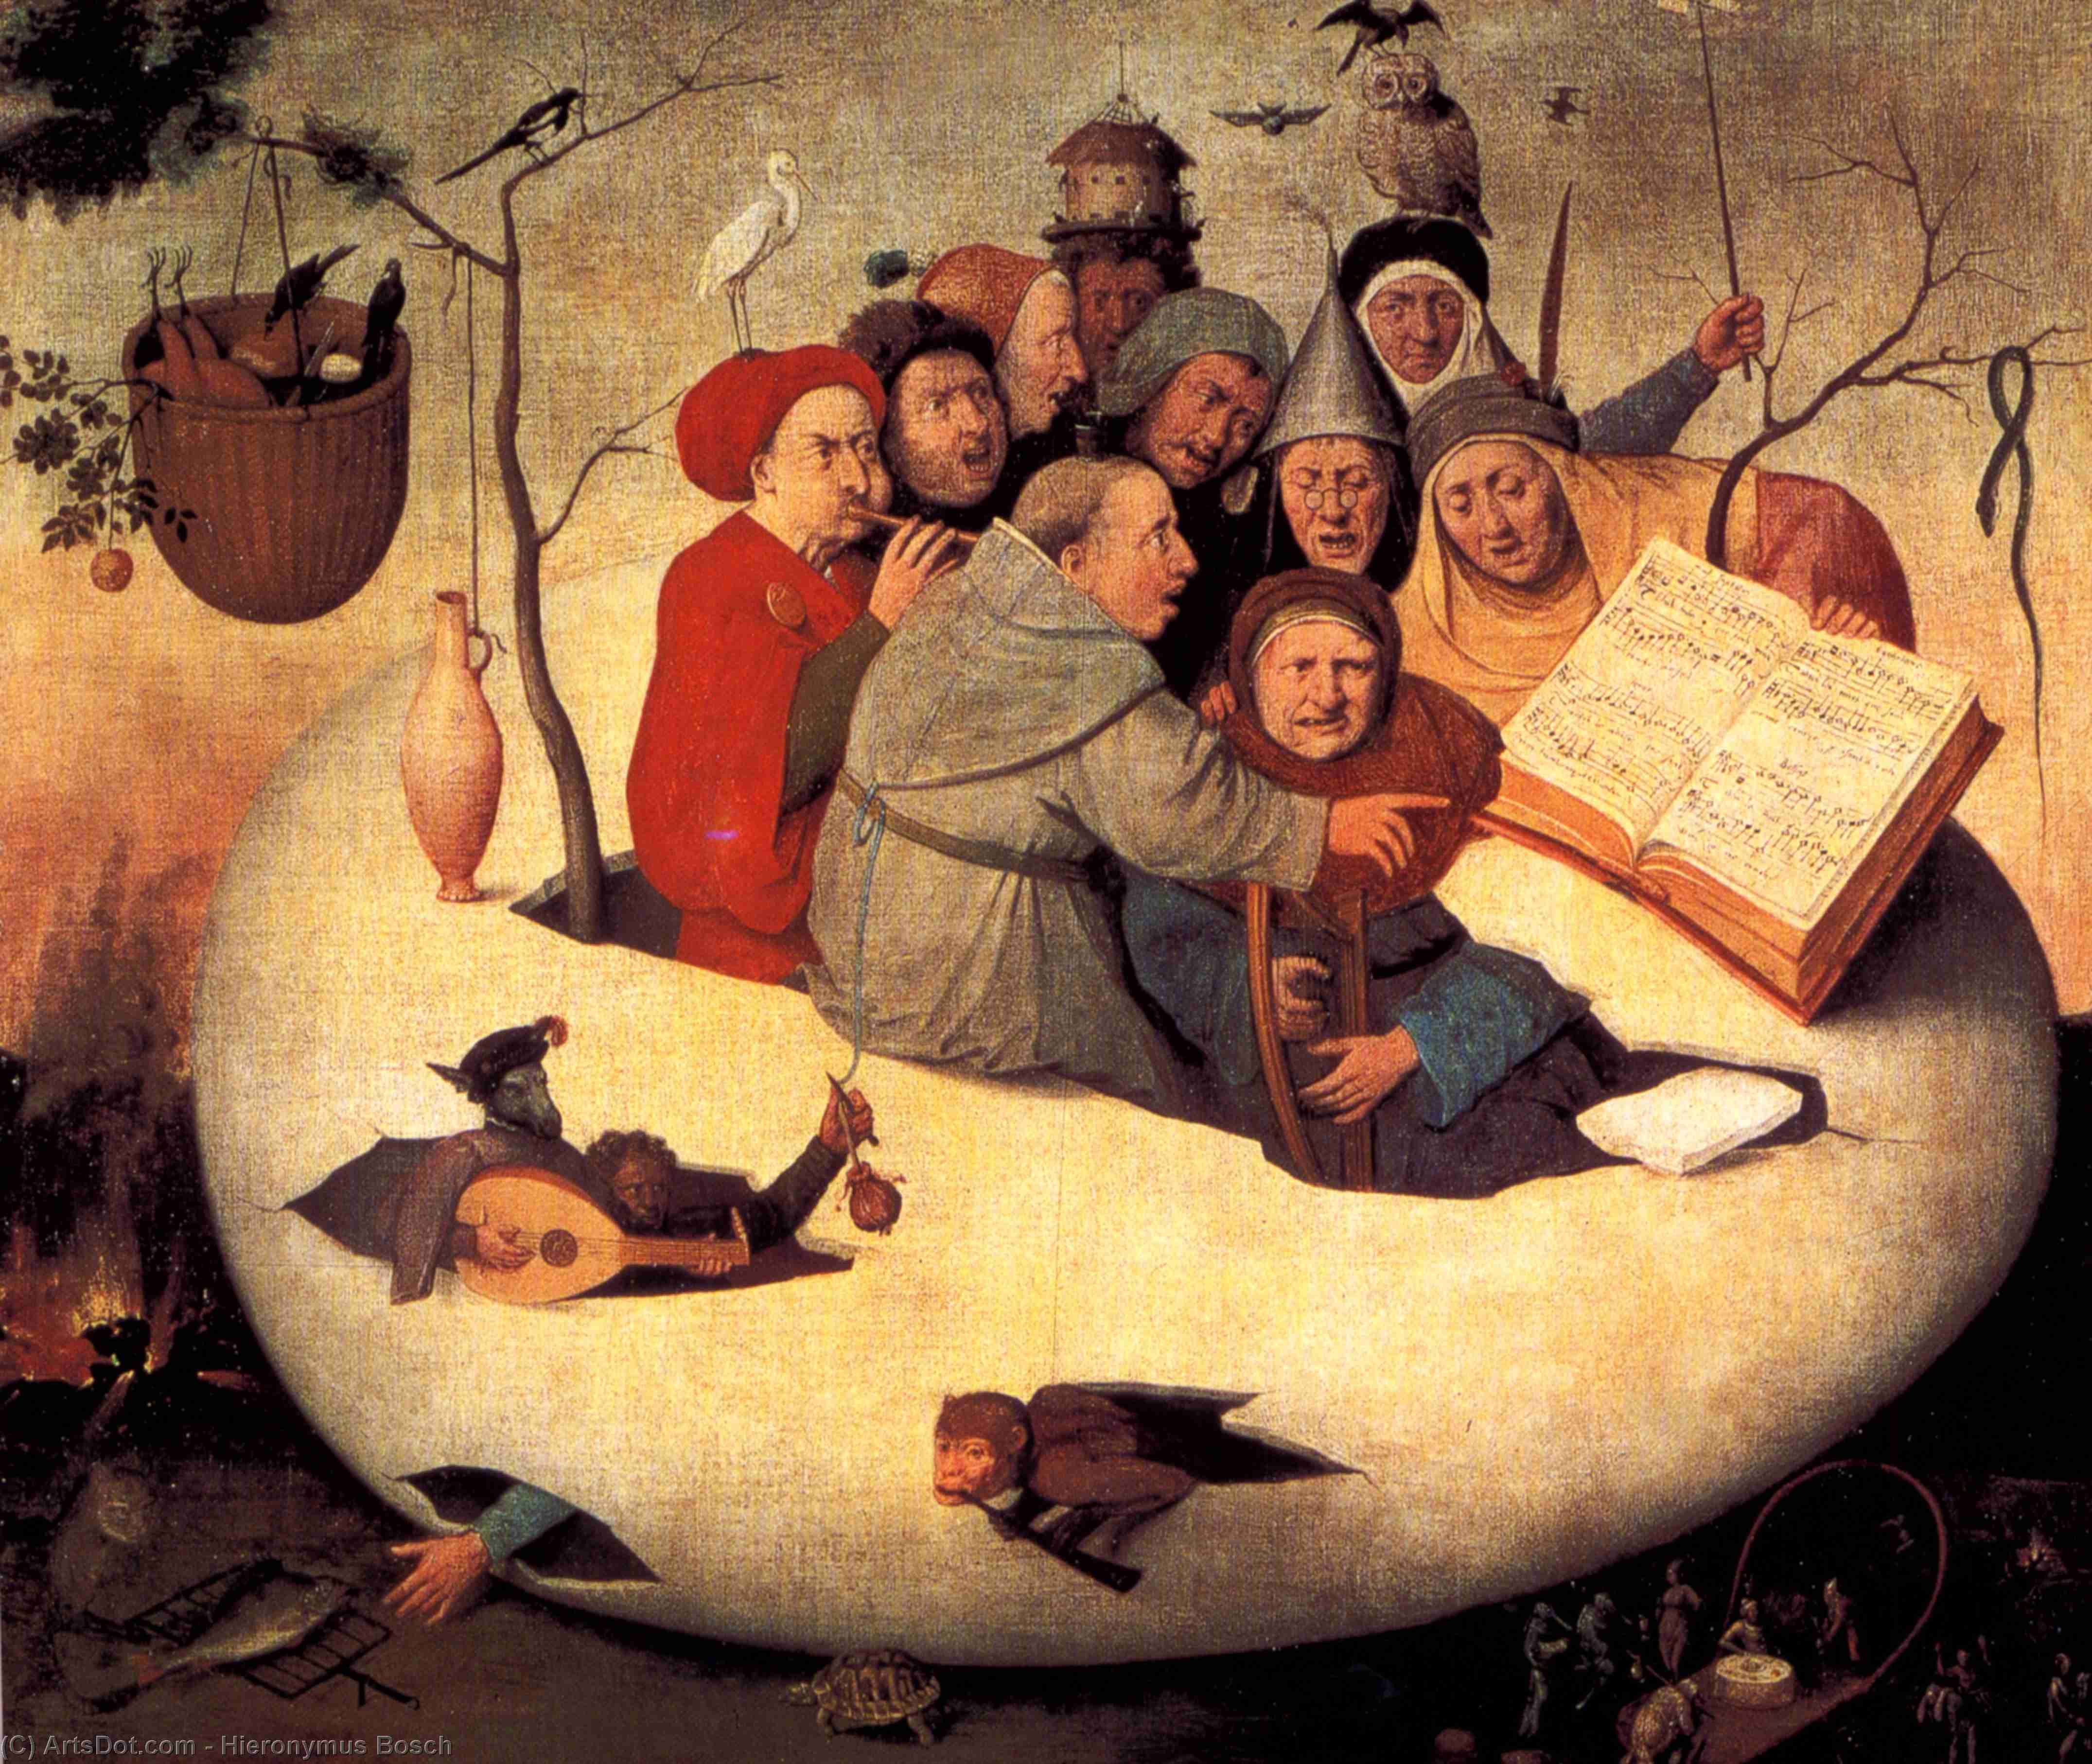 WikiOO.org - 백과 사전 - 회화, 삽화 Hieronymus Bosch - The Concert in the Egg